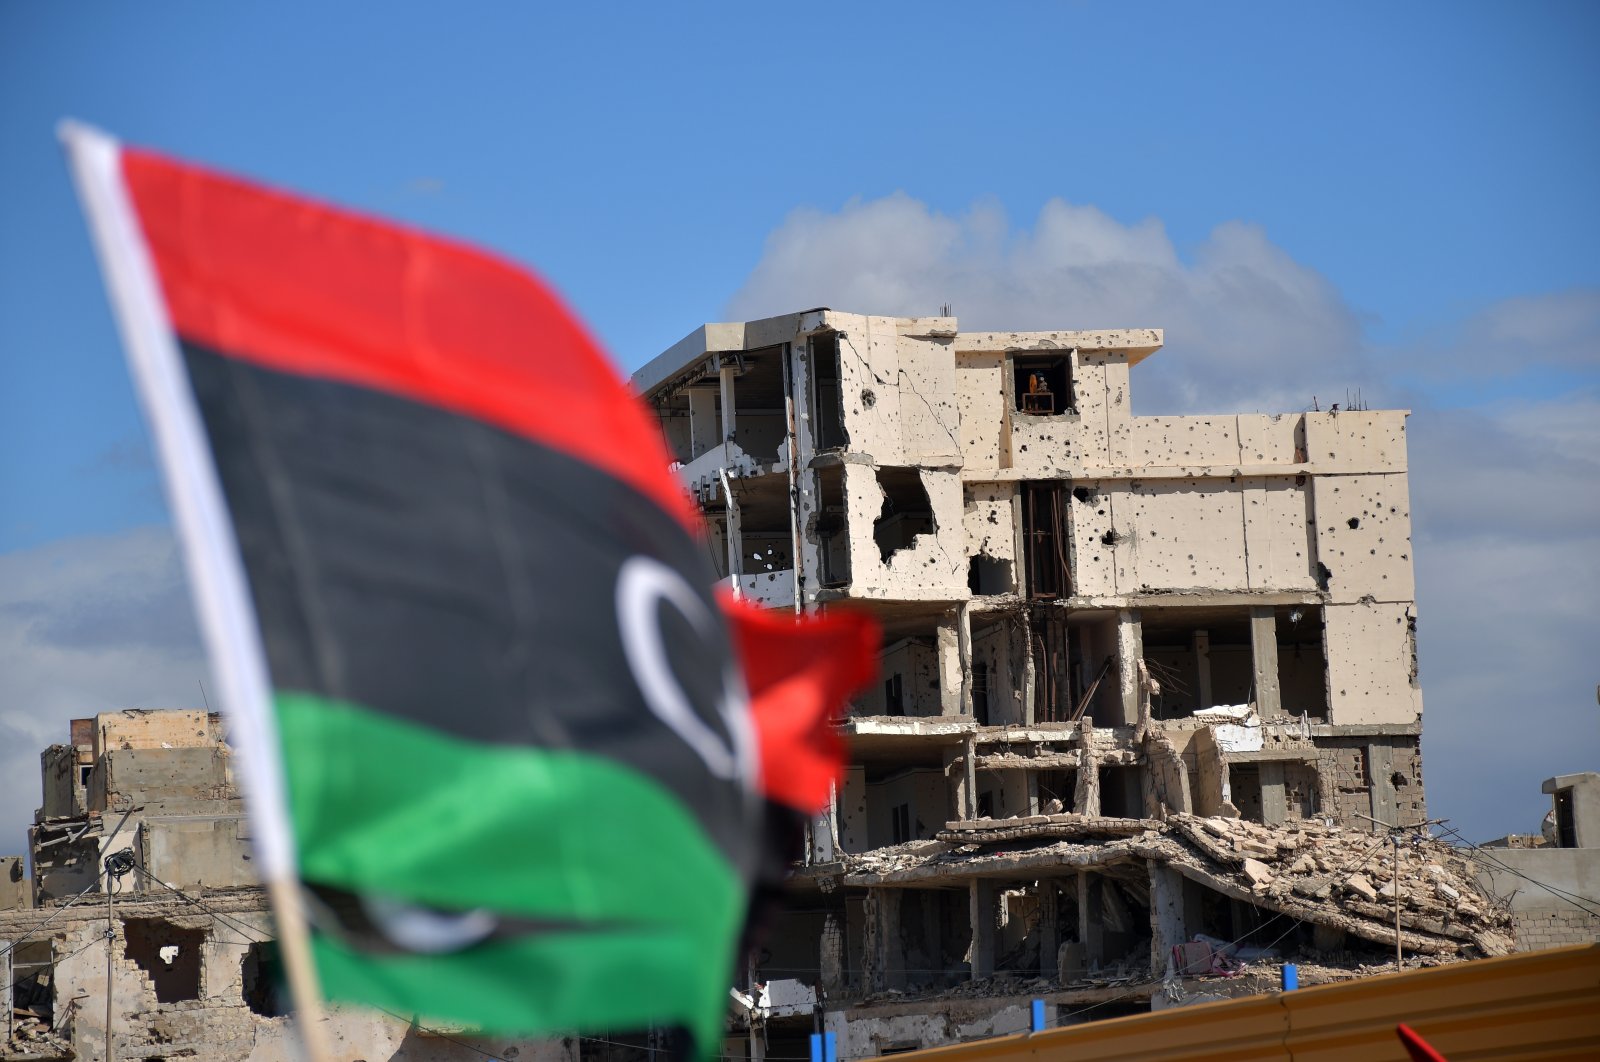 A damaged building is seen as Libyans mark the 10th anniversary of the 2011 uprising that led to the ousting and killing of longtime ruler Moammar Gadhafi, in Benghazi, Libya, Feb. 17, 2021. (AP Photo)